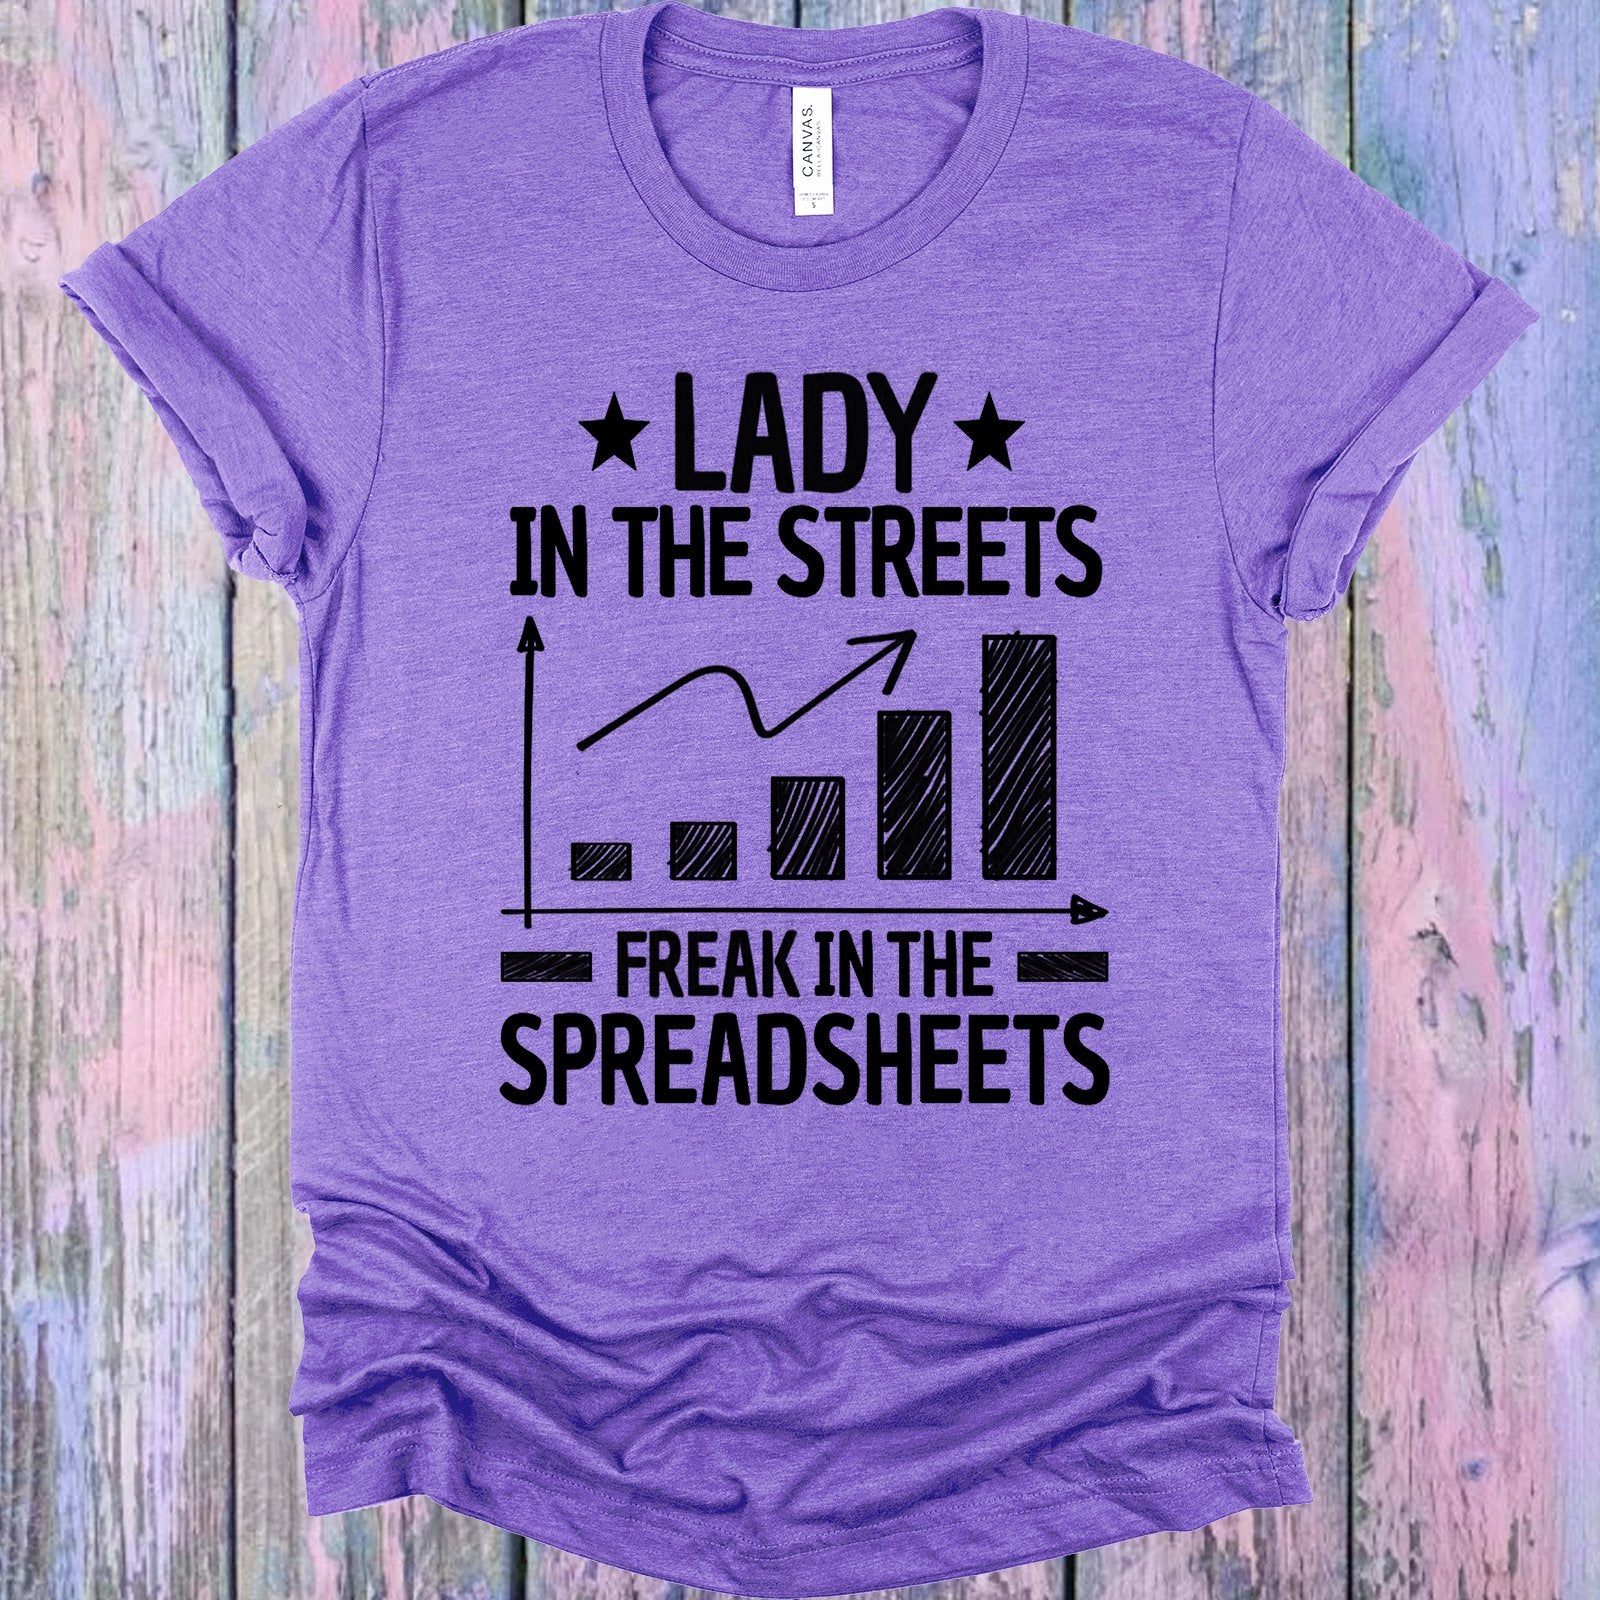 Lady In The Streets Freak Spreadsheets Graphic Tee Graphic Tee